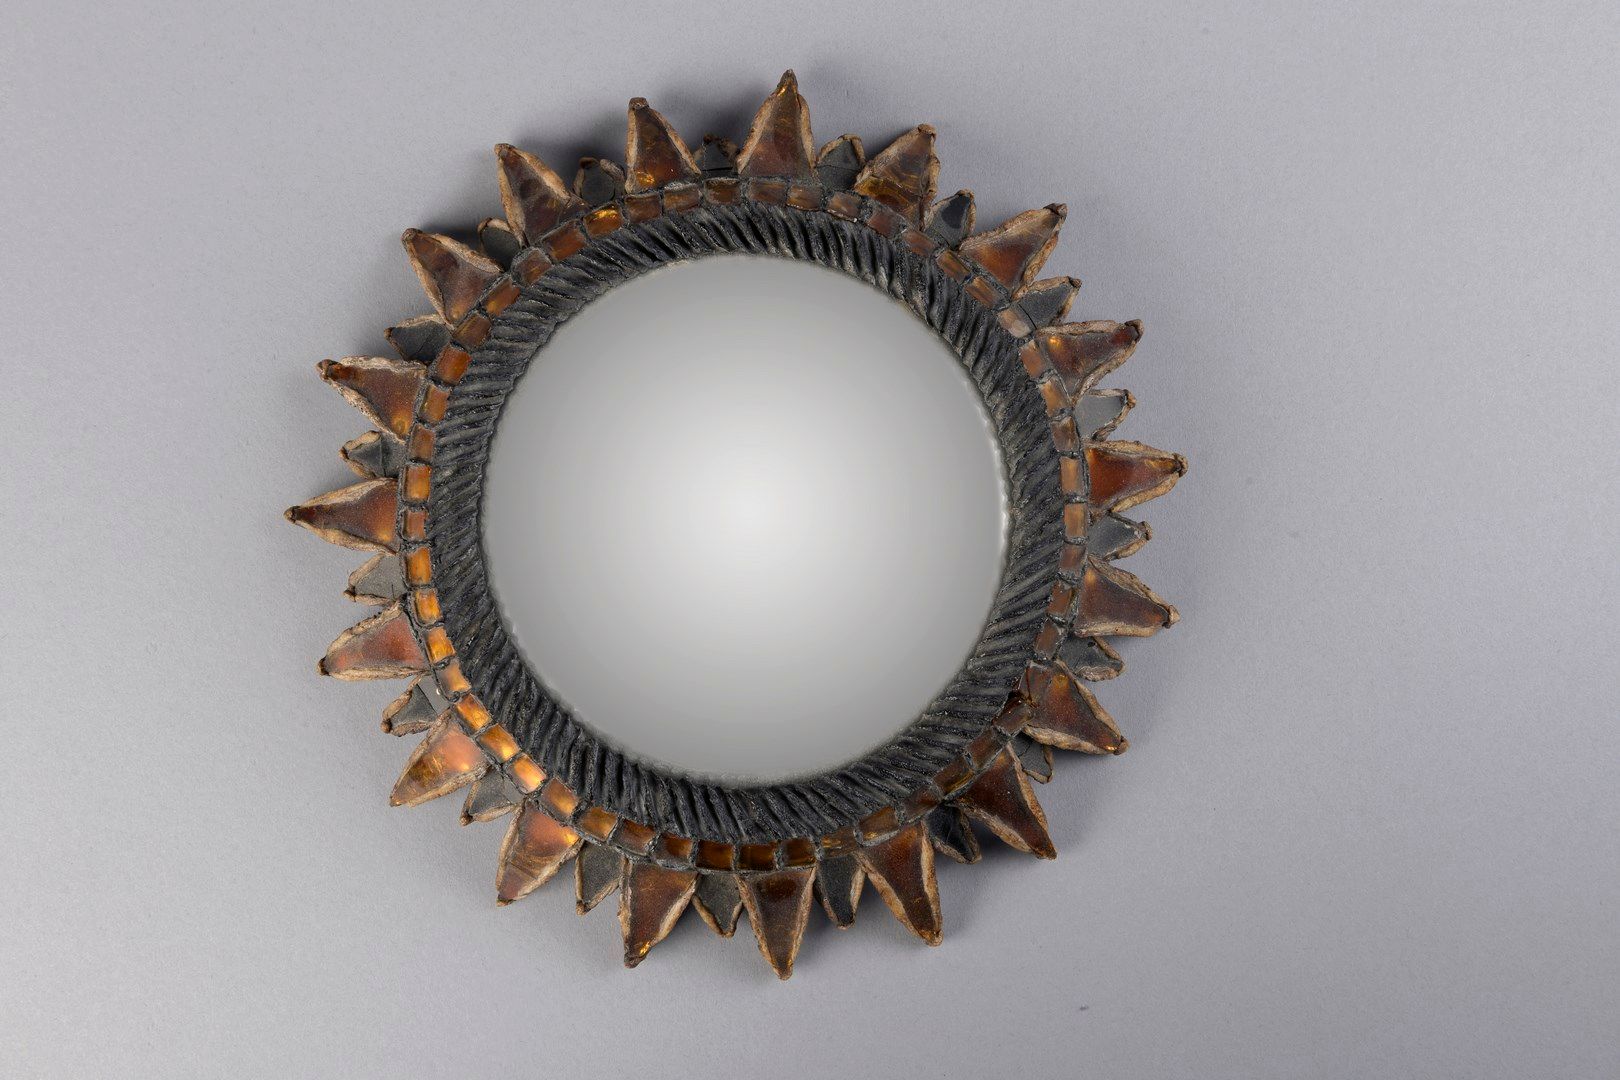 Null Line VAUTRIN (1913-1997)

Spiked sun n°1.

Witch mirror in talossel and fra&hellip;